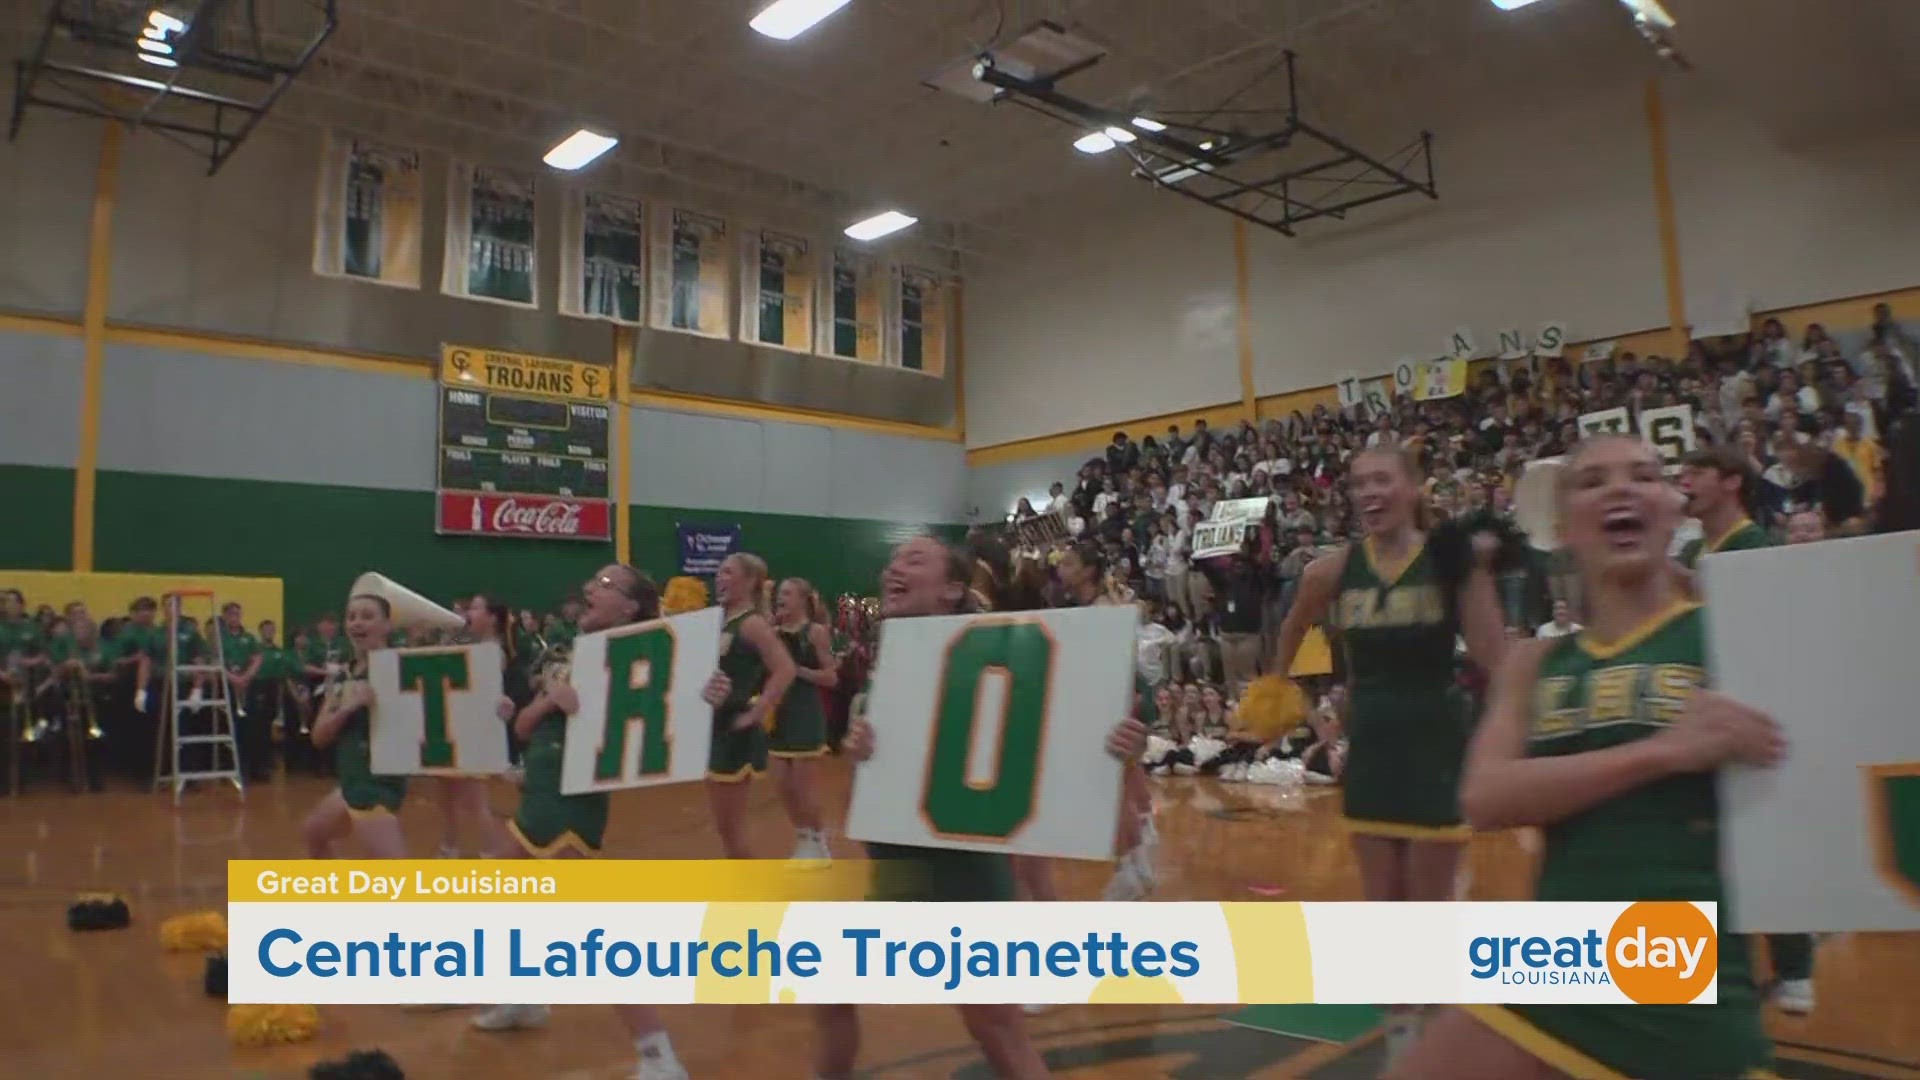 The cheer teams from Central and South Lafourche High Schools show us their school spirit.